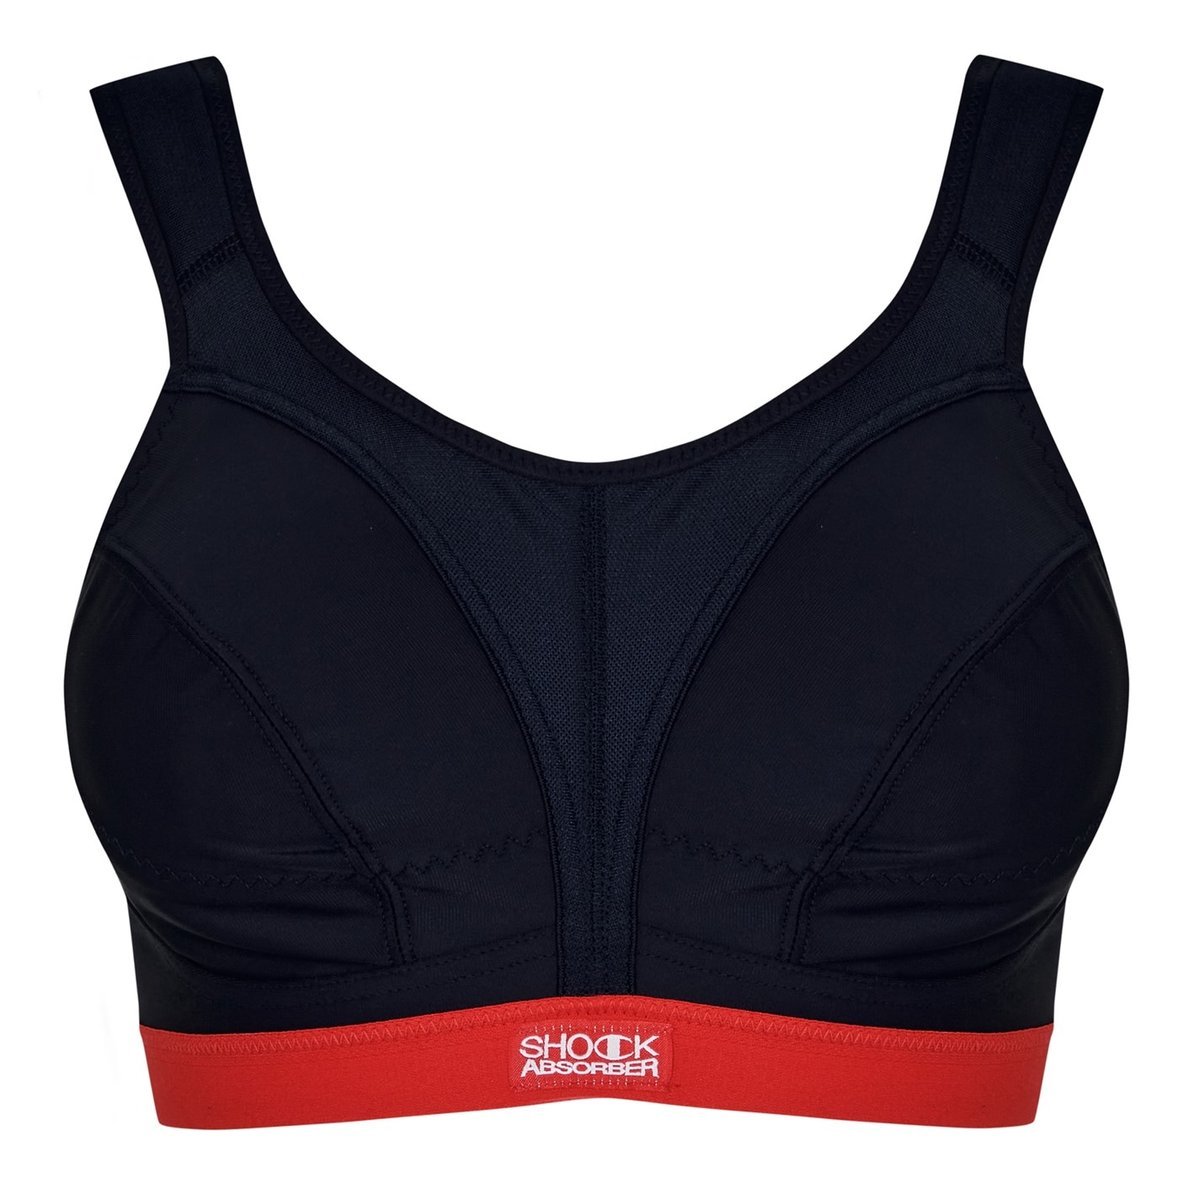 Active D+ Max Support Sports Bra New White 40D